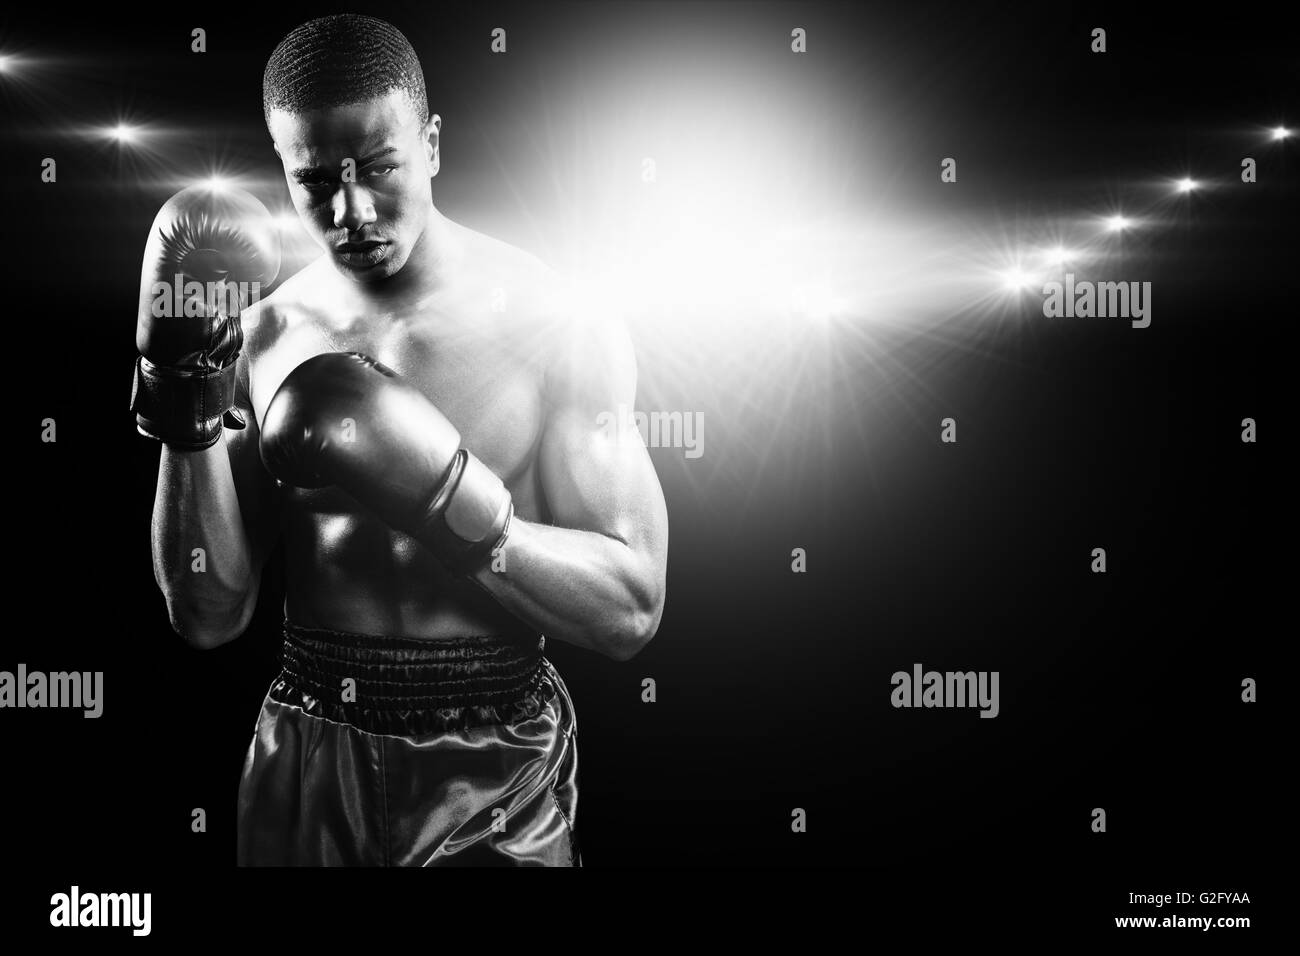 Composite image of portrait of boxer performing uppercut Stock Photo